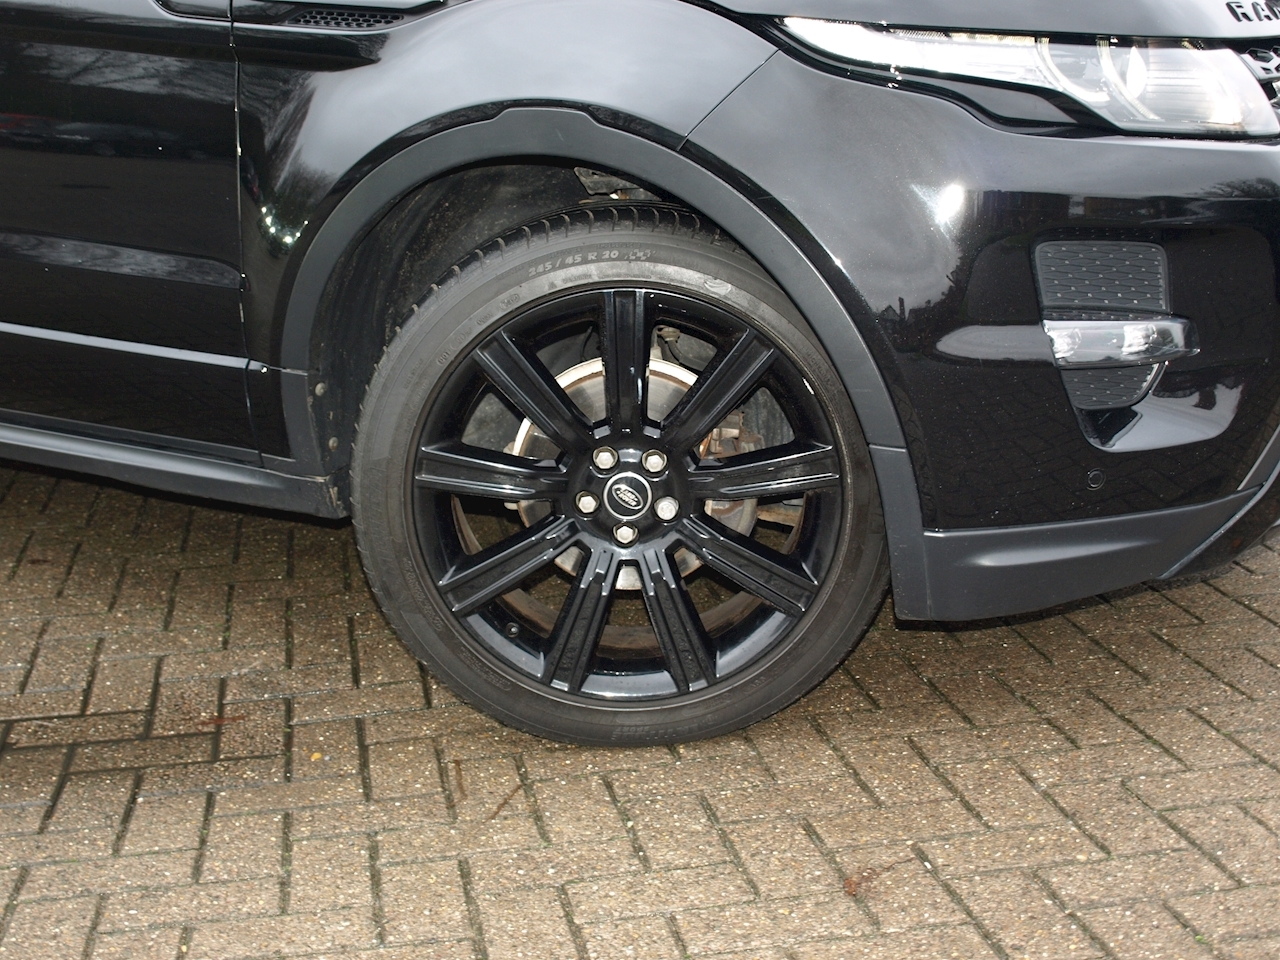 Range Rover front right tire.